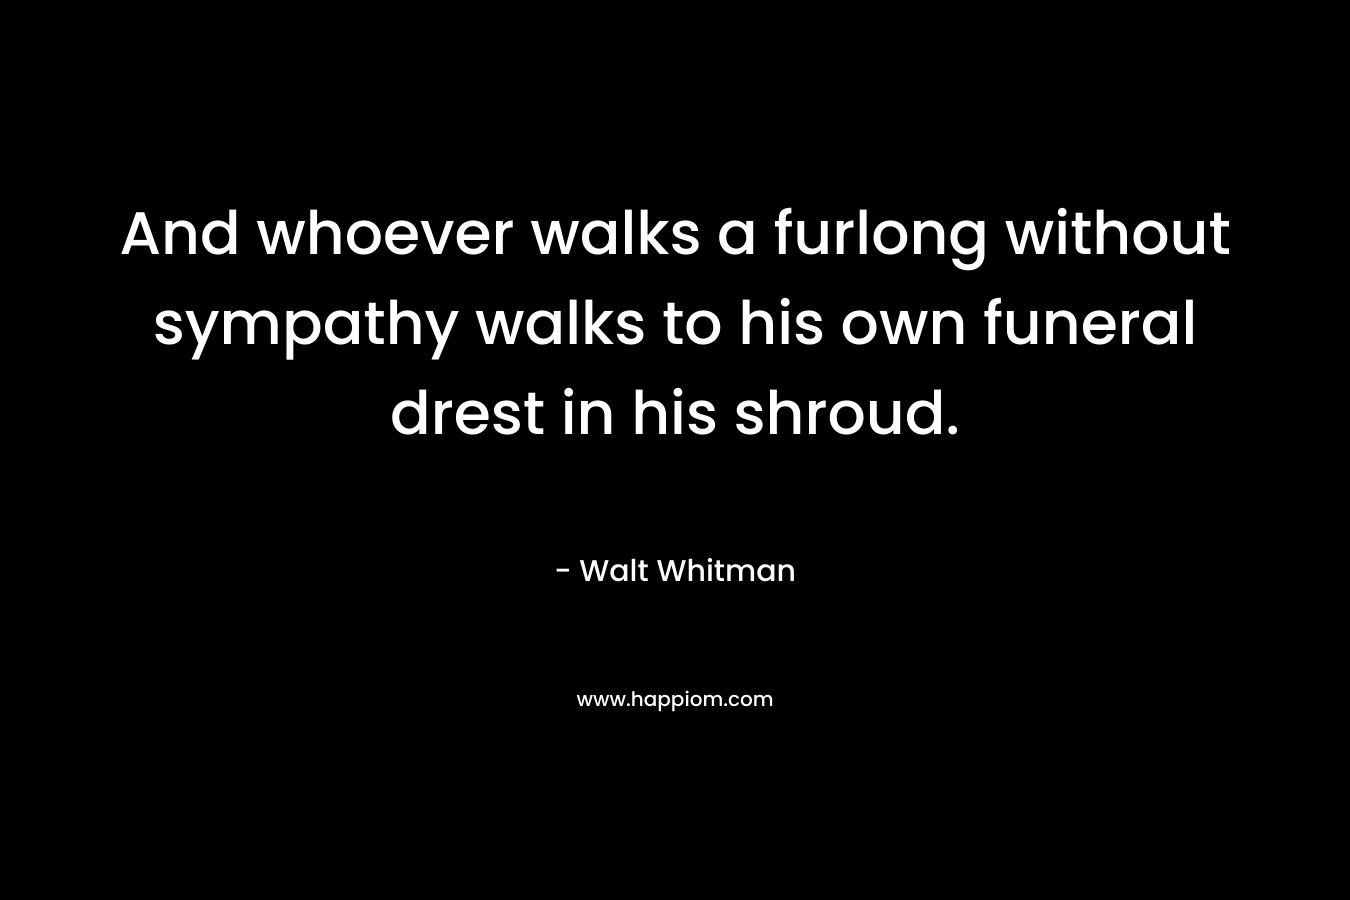 And whoever walks a furlong without sympathy walks to his own funeral drest in his shroud.